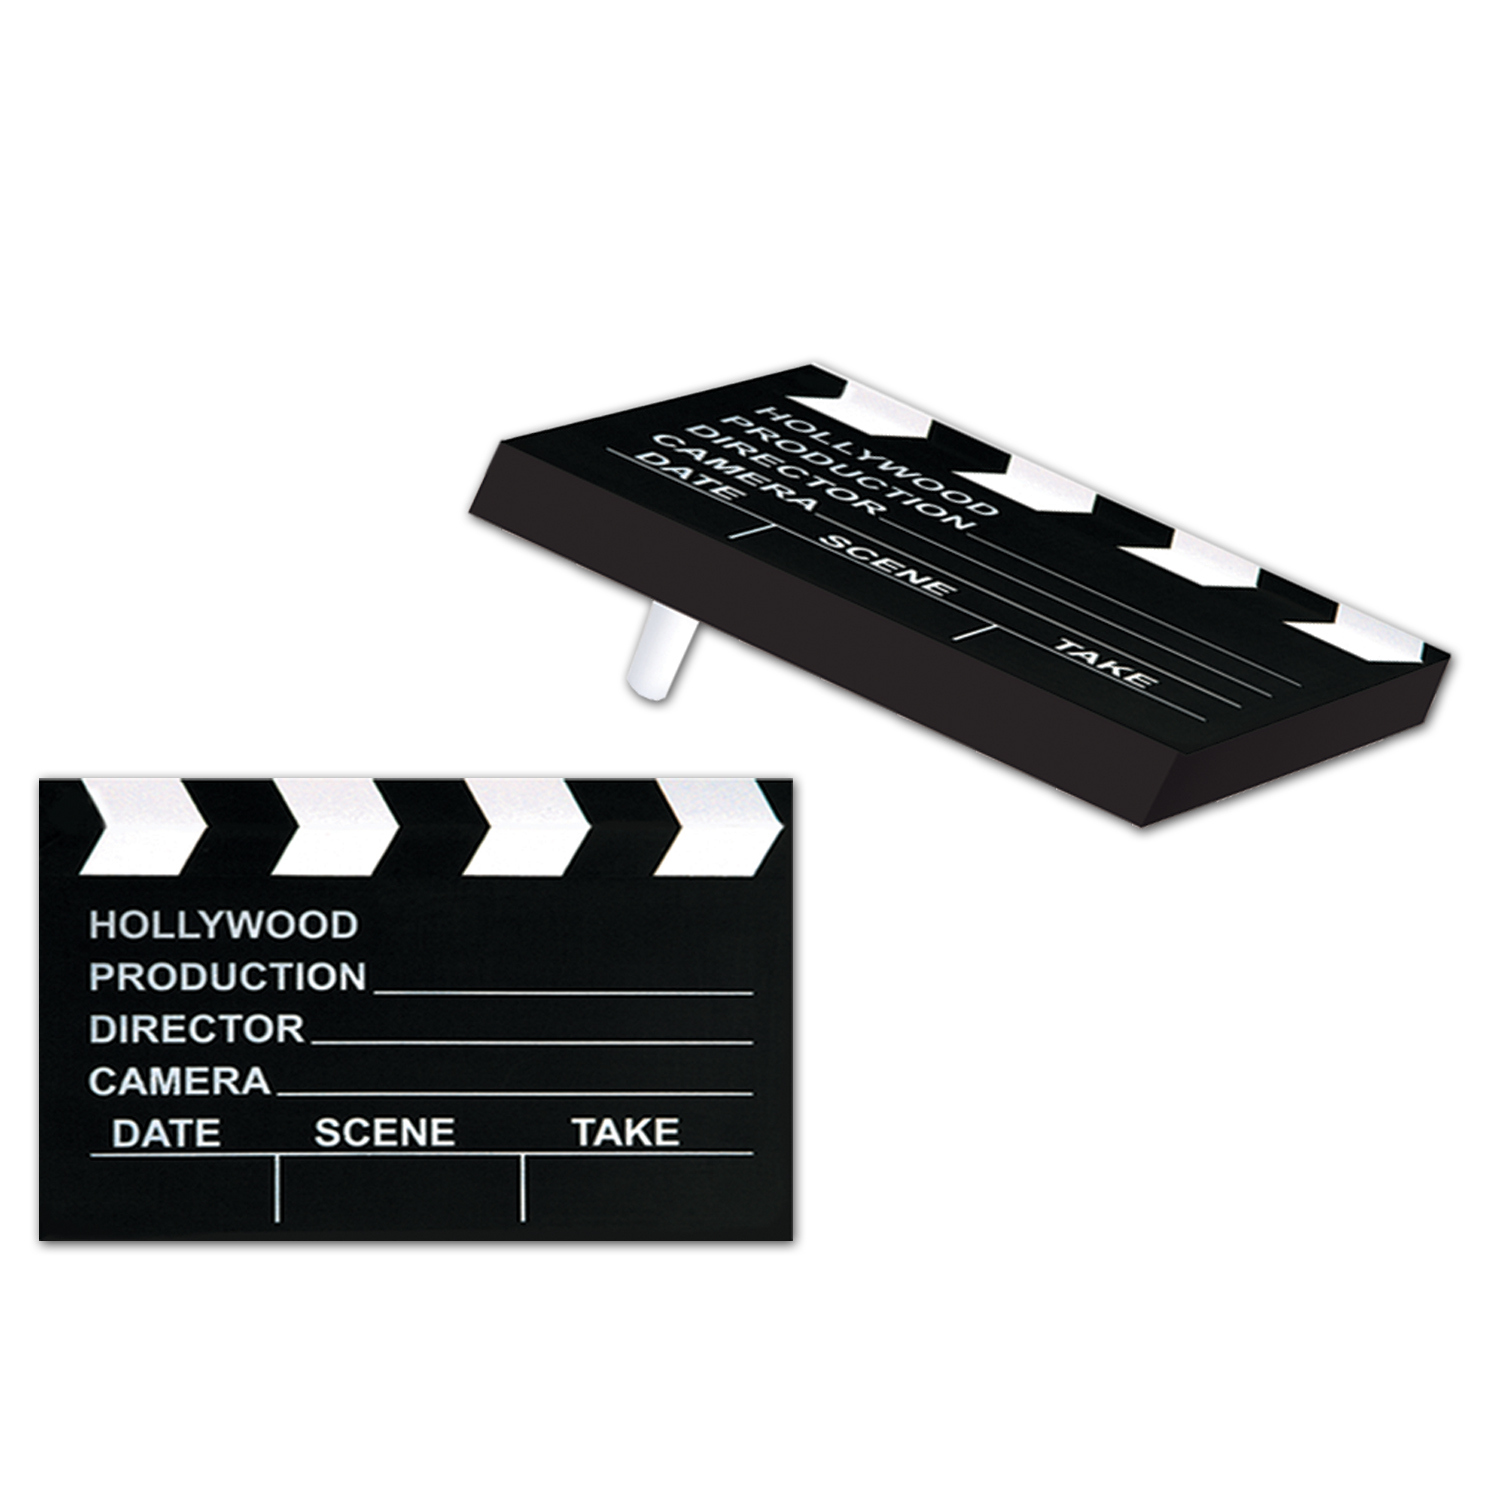 Hollywood clapboard party noisemaker. 